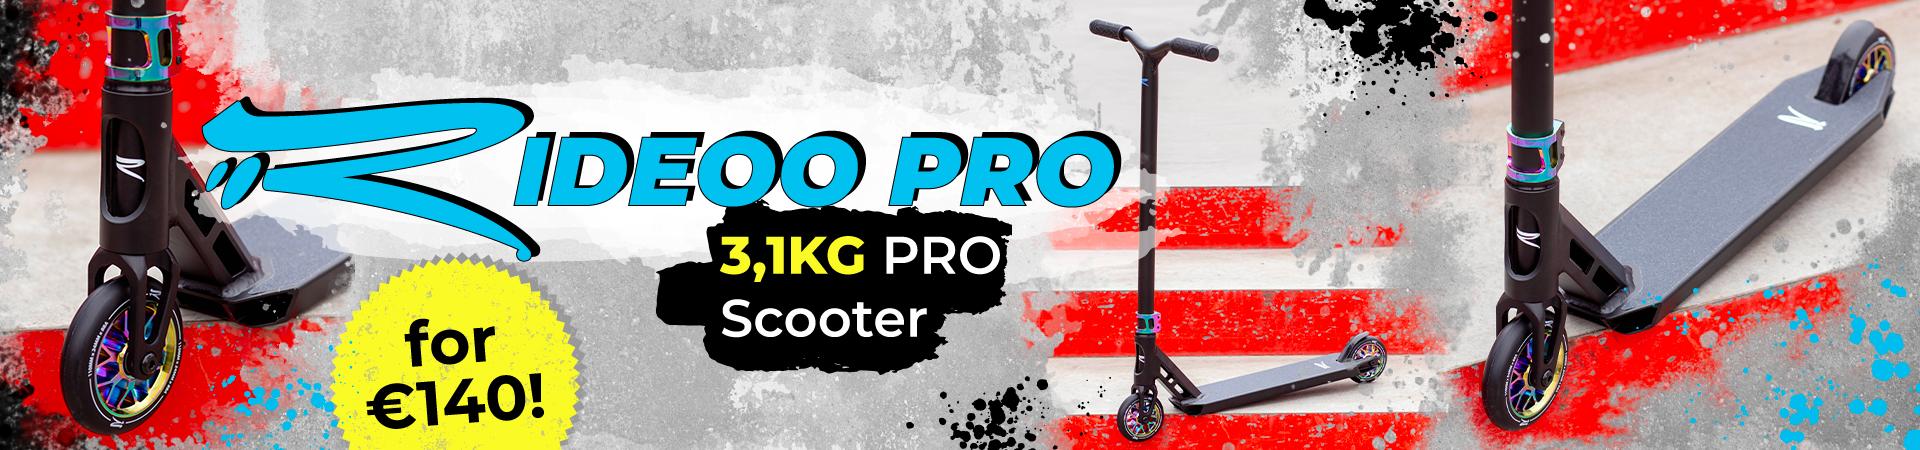 Rideoo Pro Scooter Sale